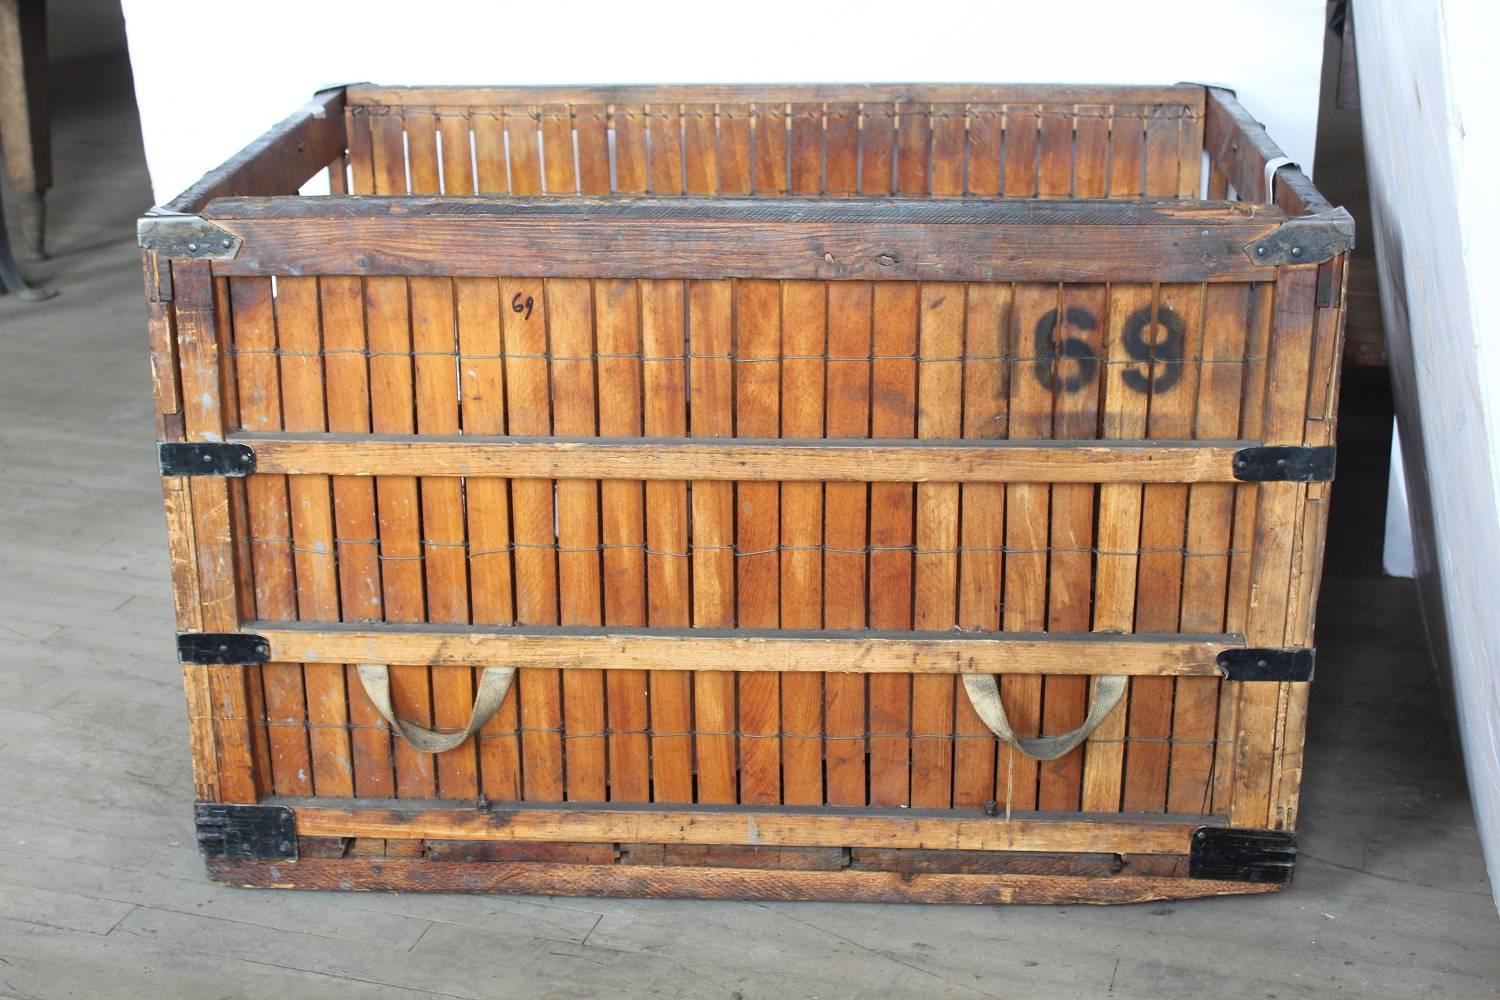 Large antique American Industrial wood crate. We have more available.